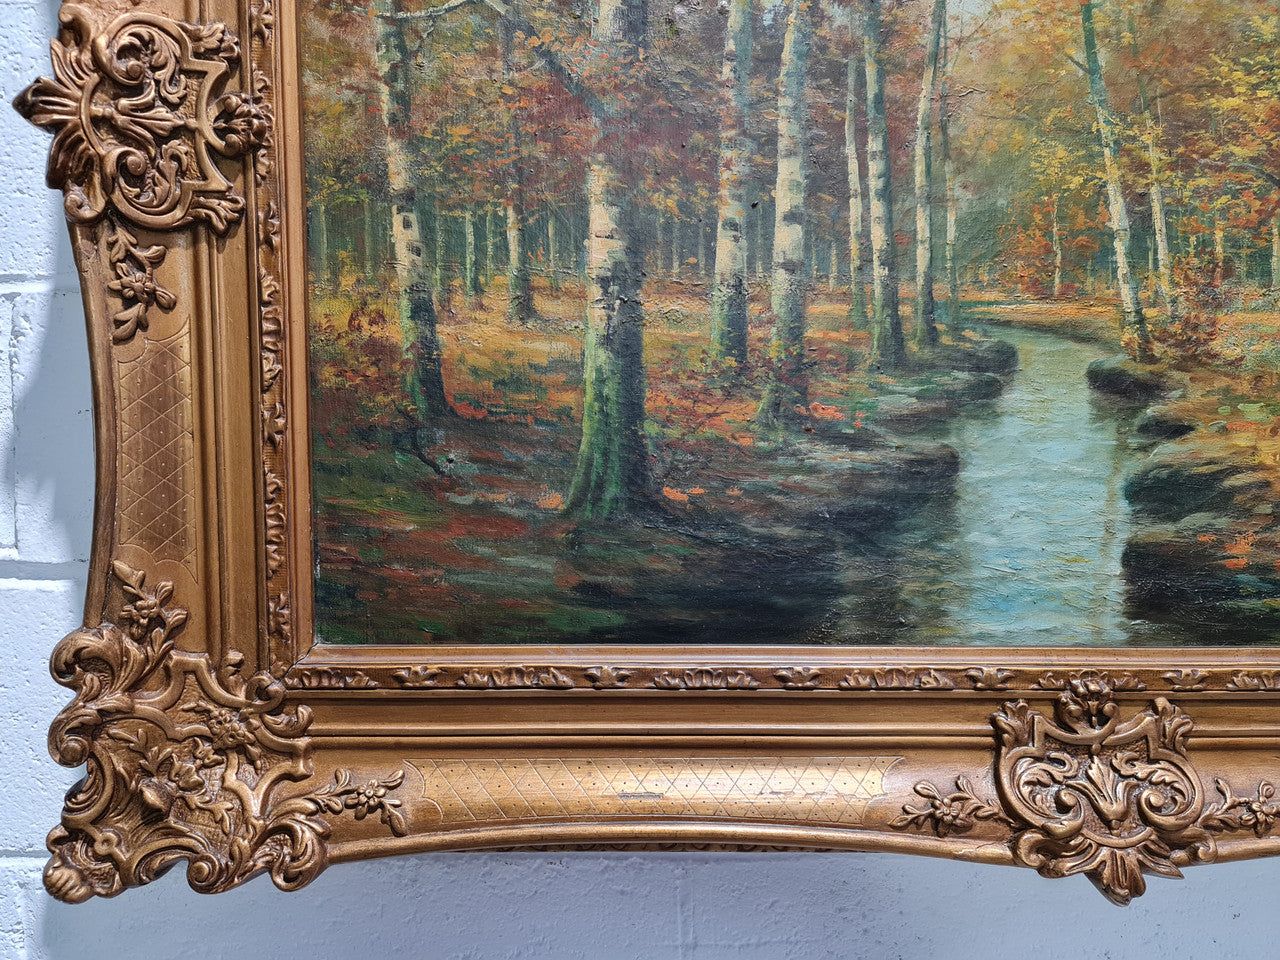 Large French signed oil on canvas painting of Autumn trees on stream scene. In a ornate gilt frame and is in good original condition.